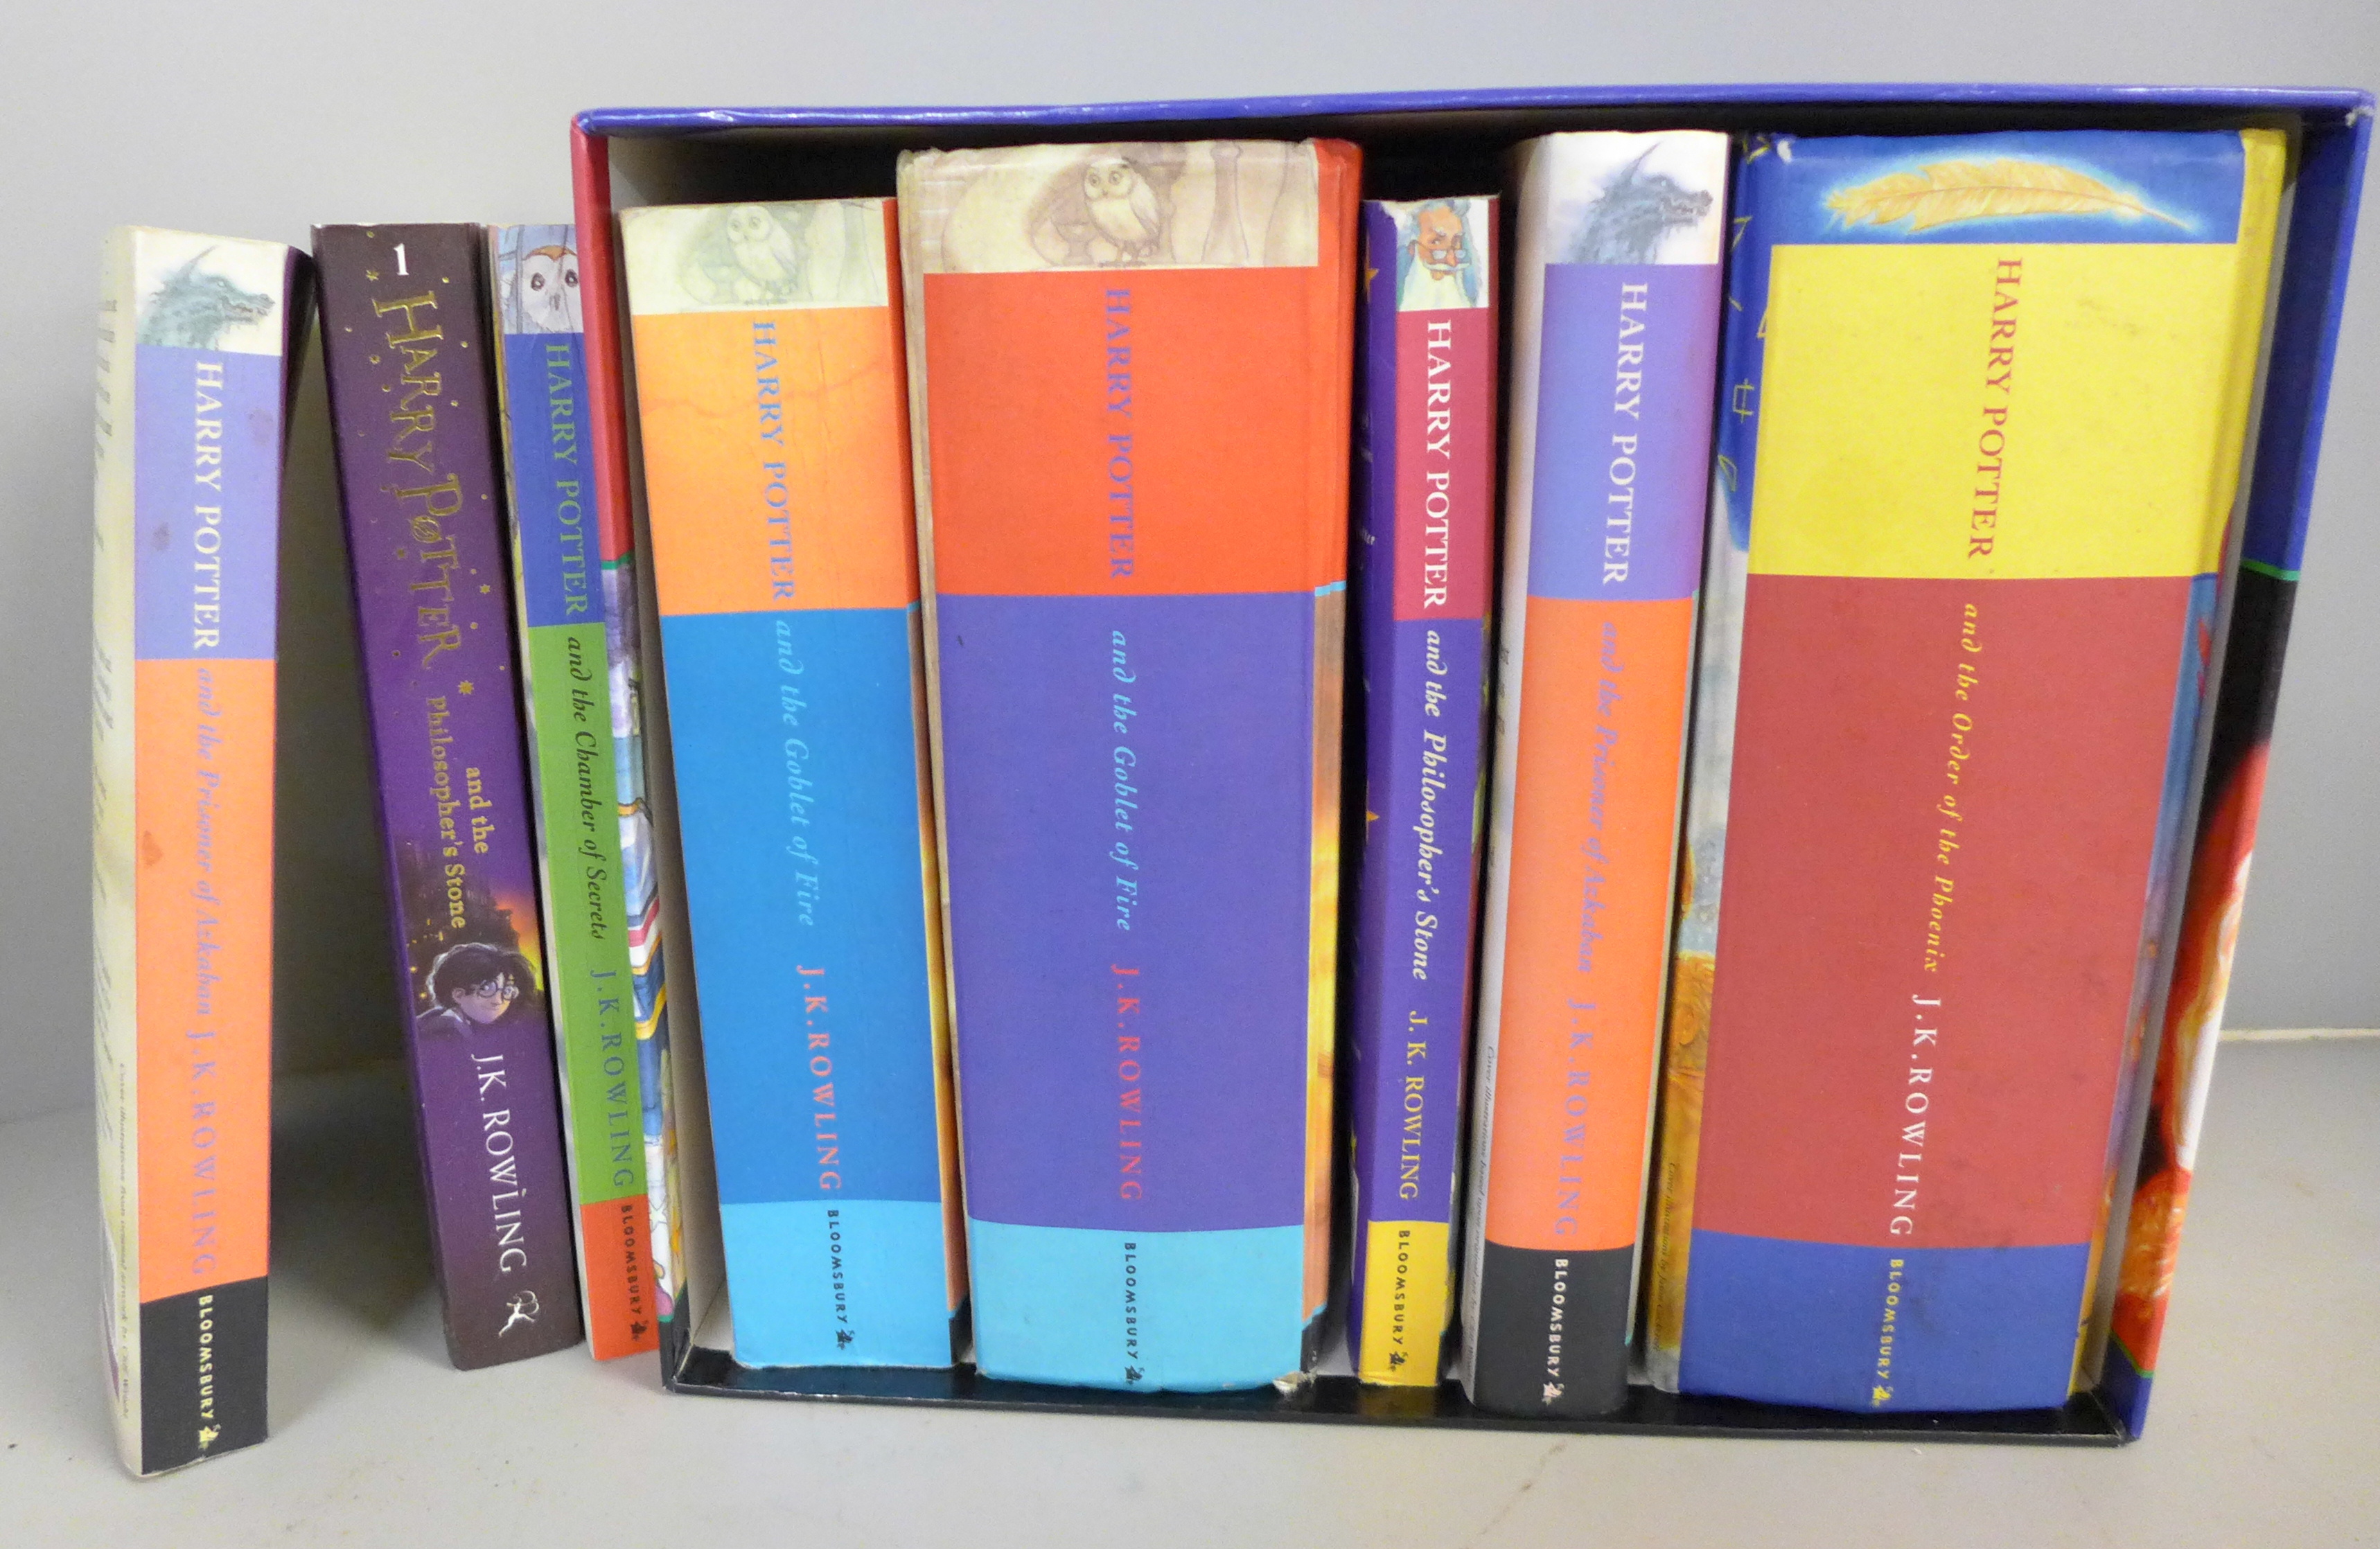 A collection of Harry Potter novels